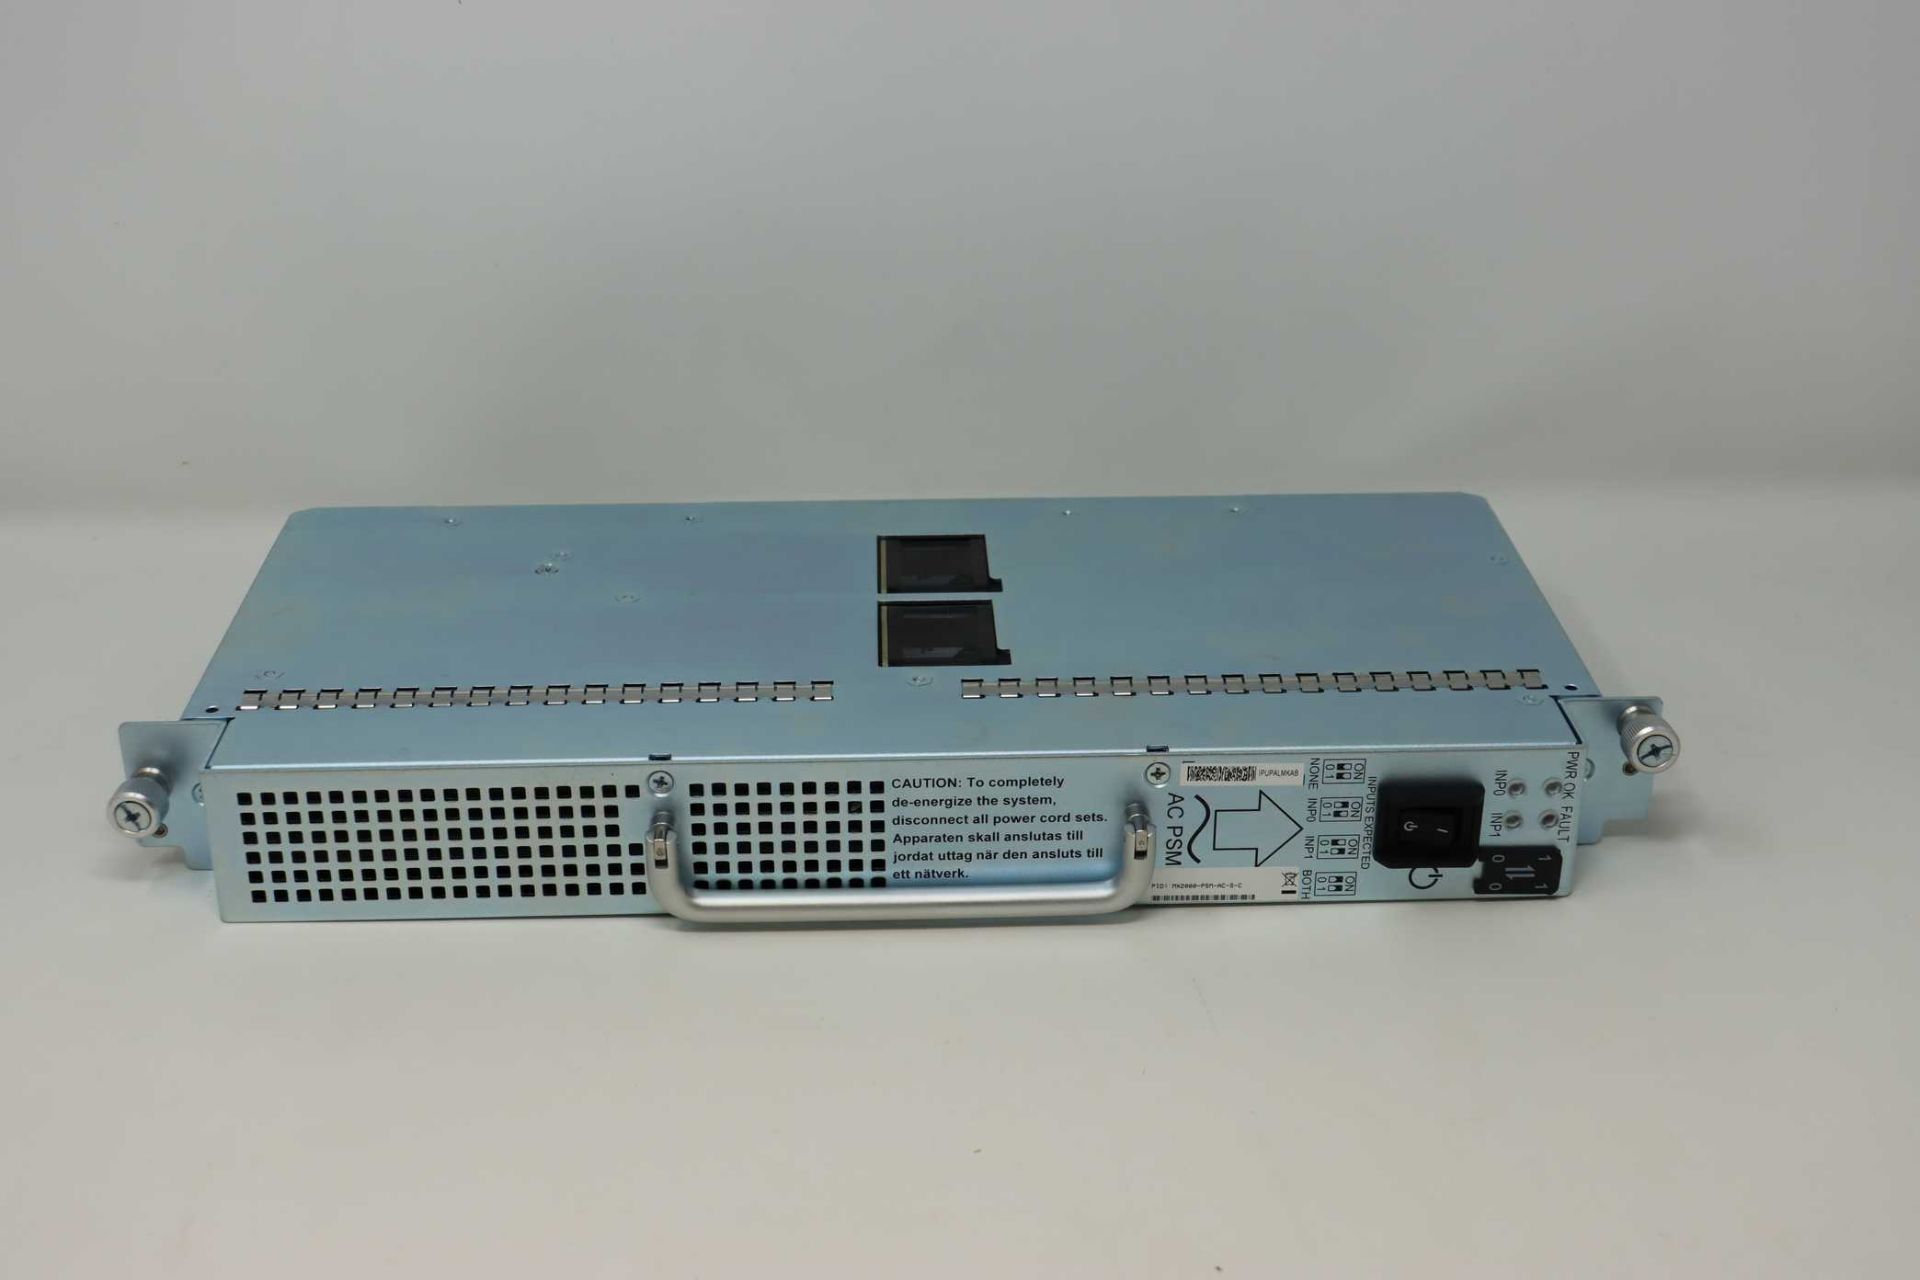 A pre-owned Delta Electronics DPS-2500EB A REV S6 Switching Power Supply (Untested, sold as seen).